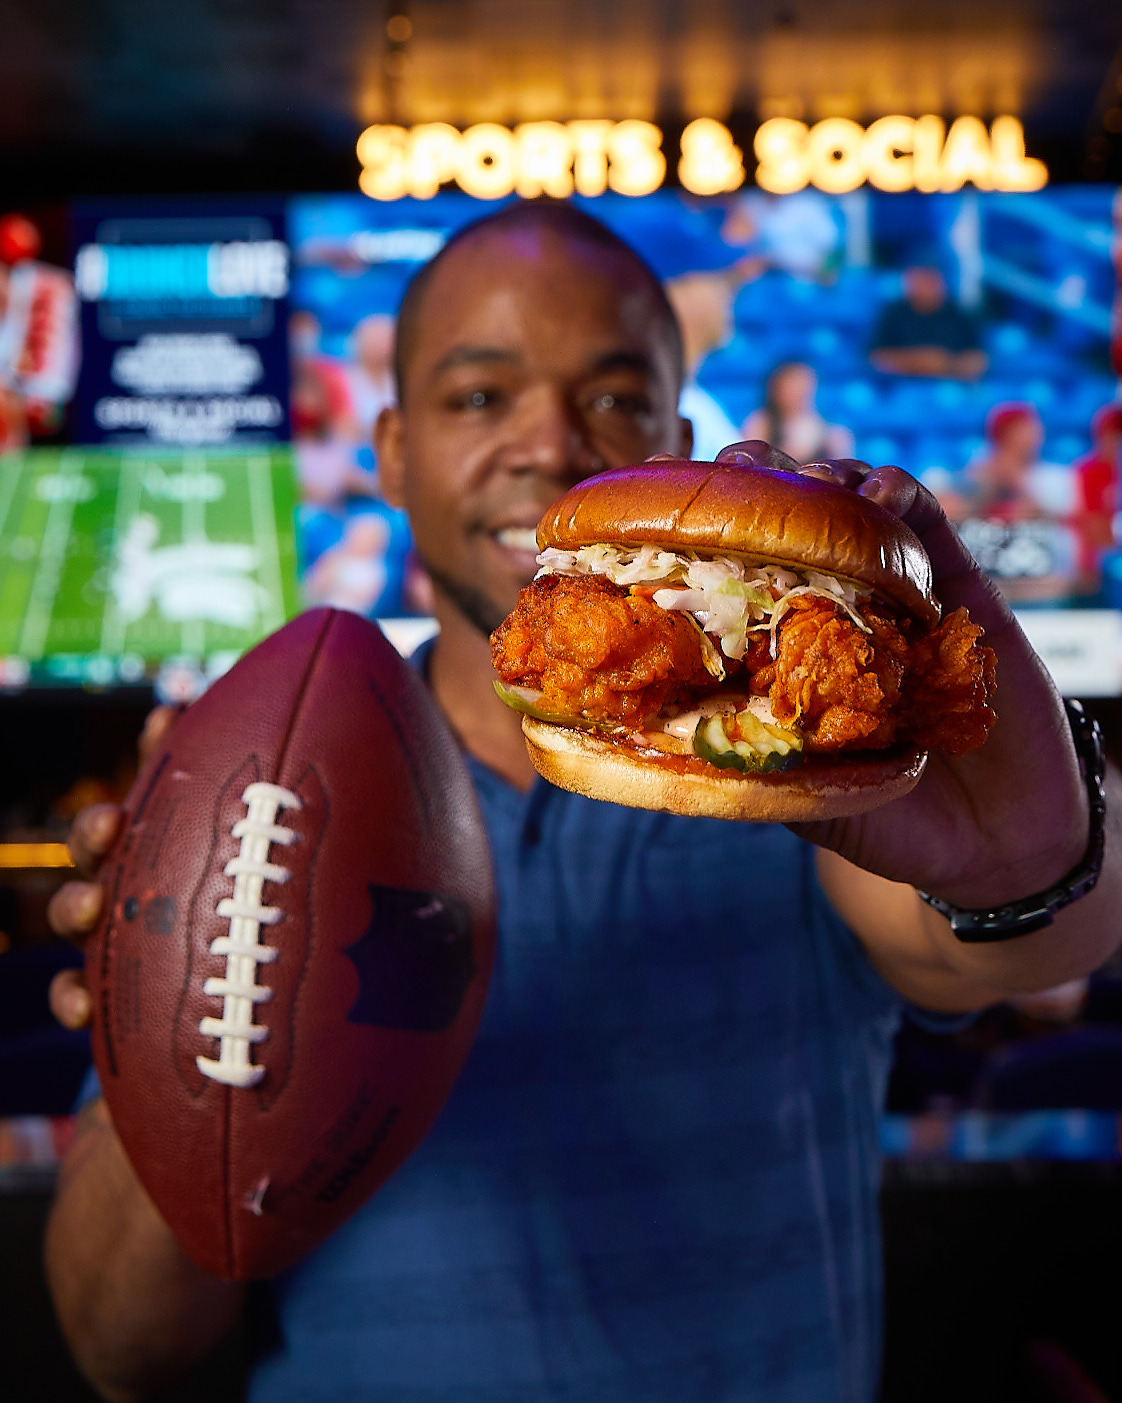 Man at Sports & Social holding a football and a Nashville Hot Chicken Sandwich.